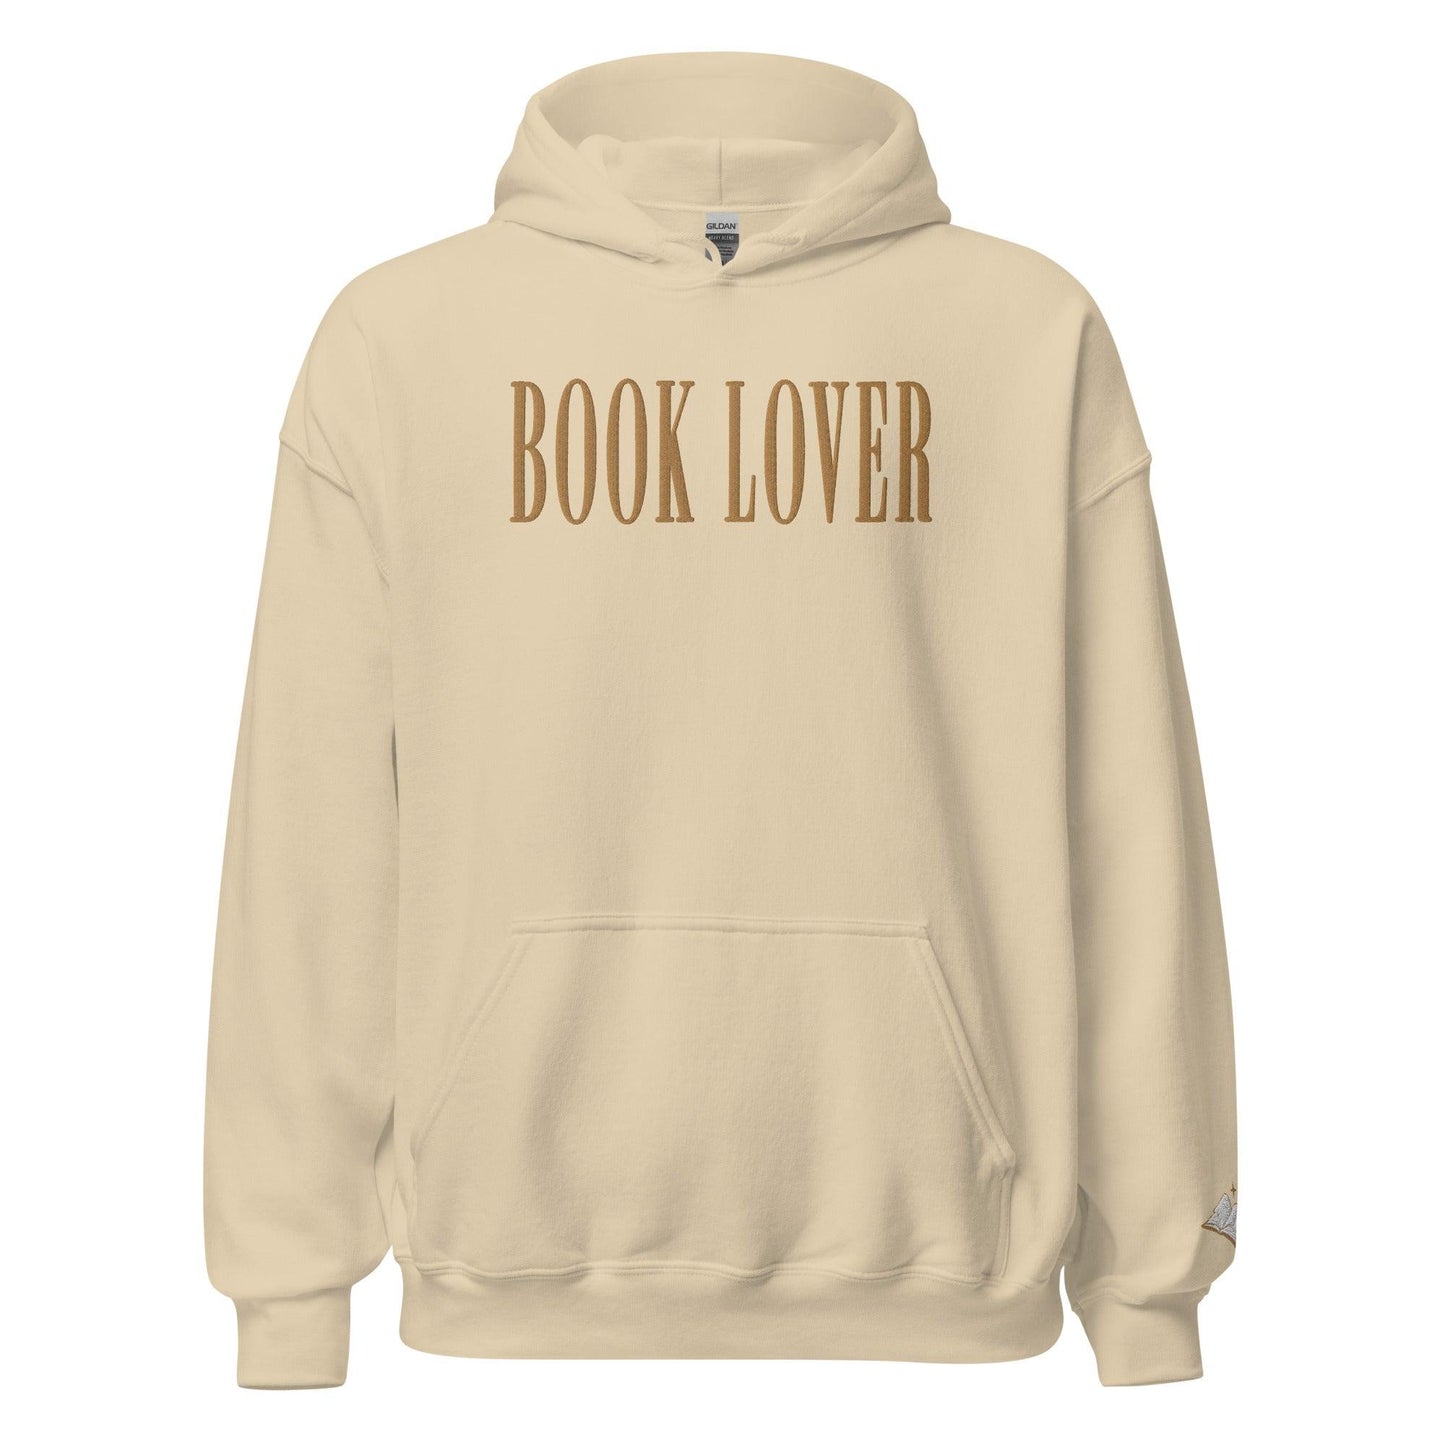 Book Lover Embroidered Hoodie - The Bean Workshop - book lover, bookish, embroidered, hoodie, minimalistic